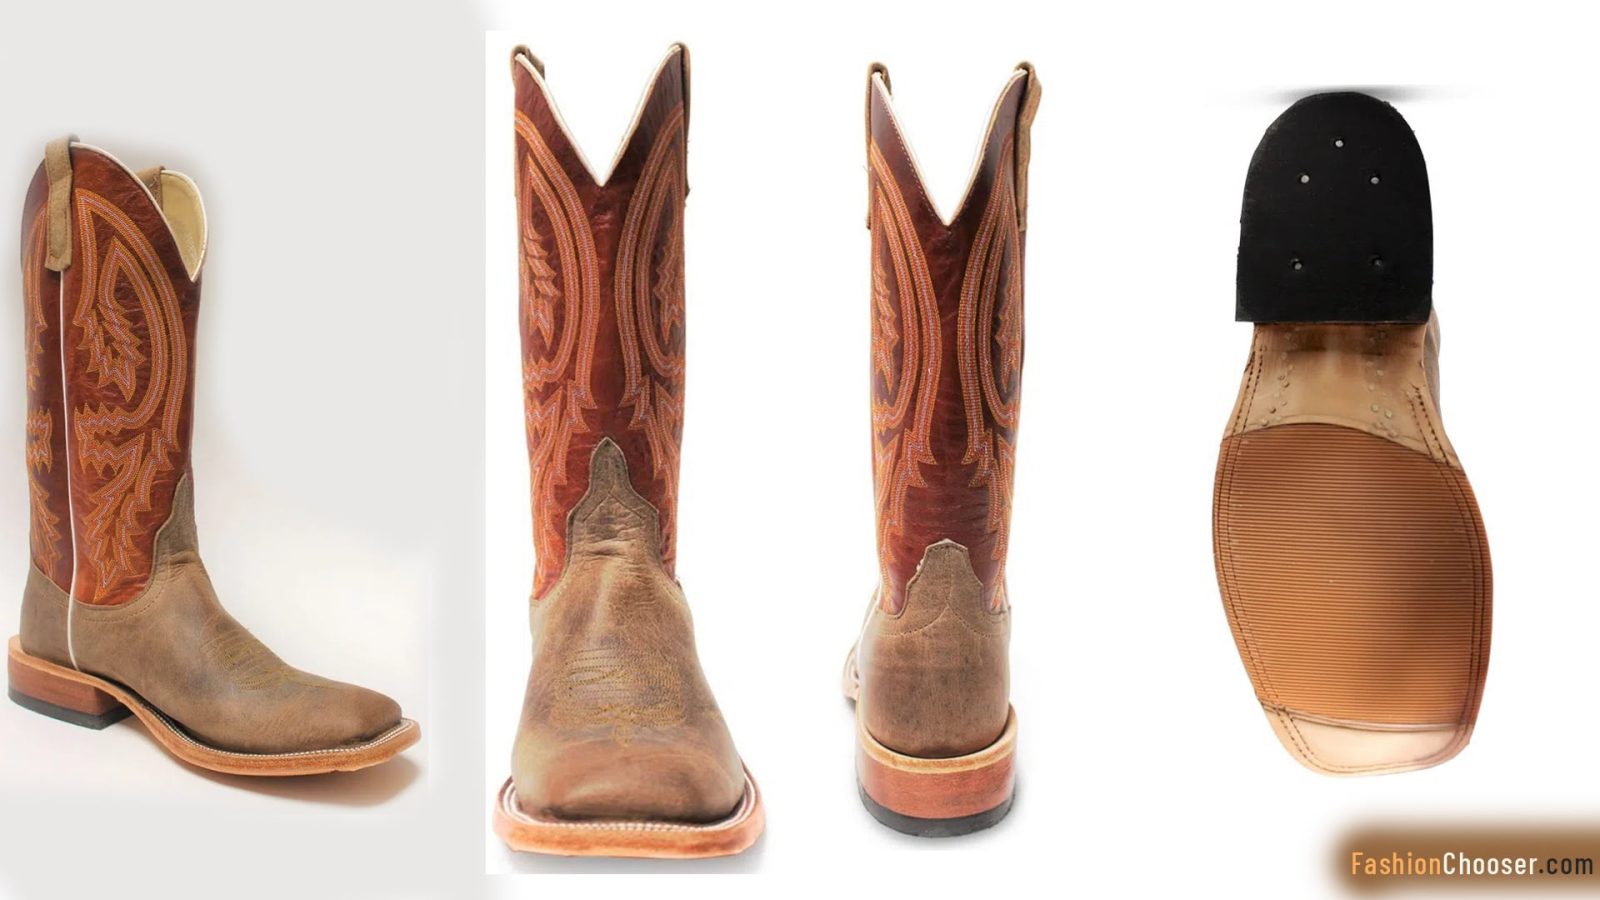 anderson bean boot company - comfortable cowboy boots brand